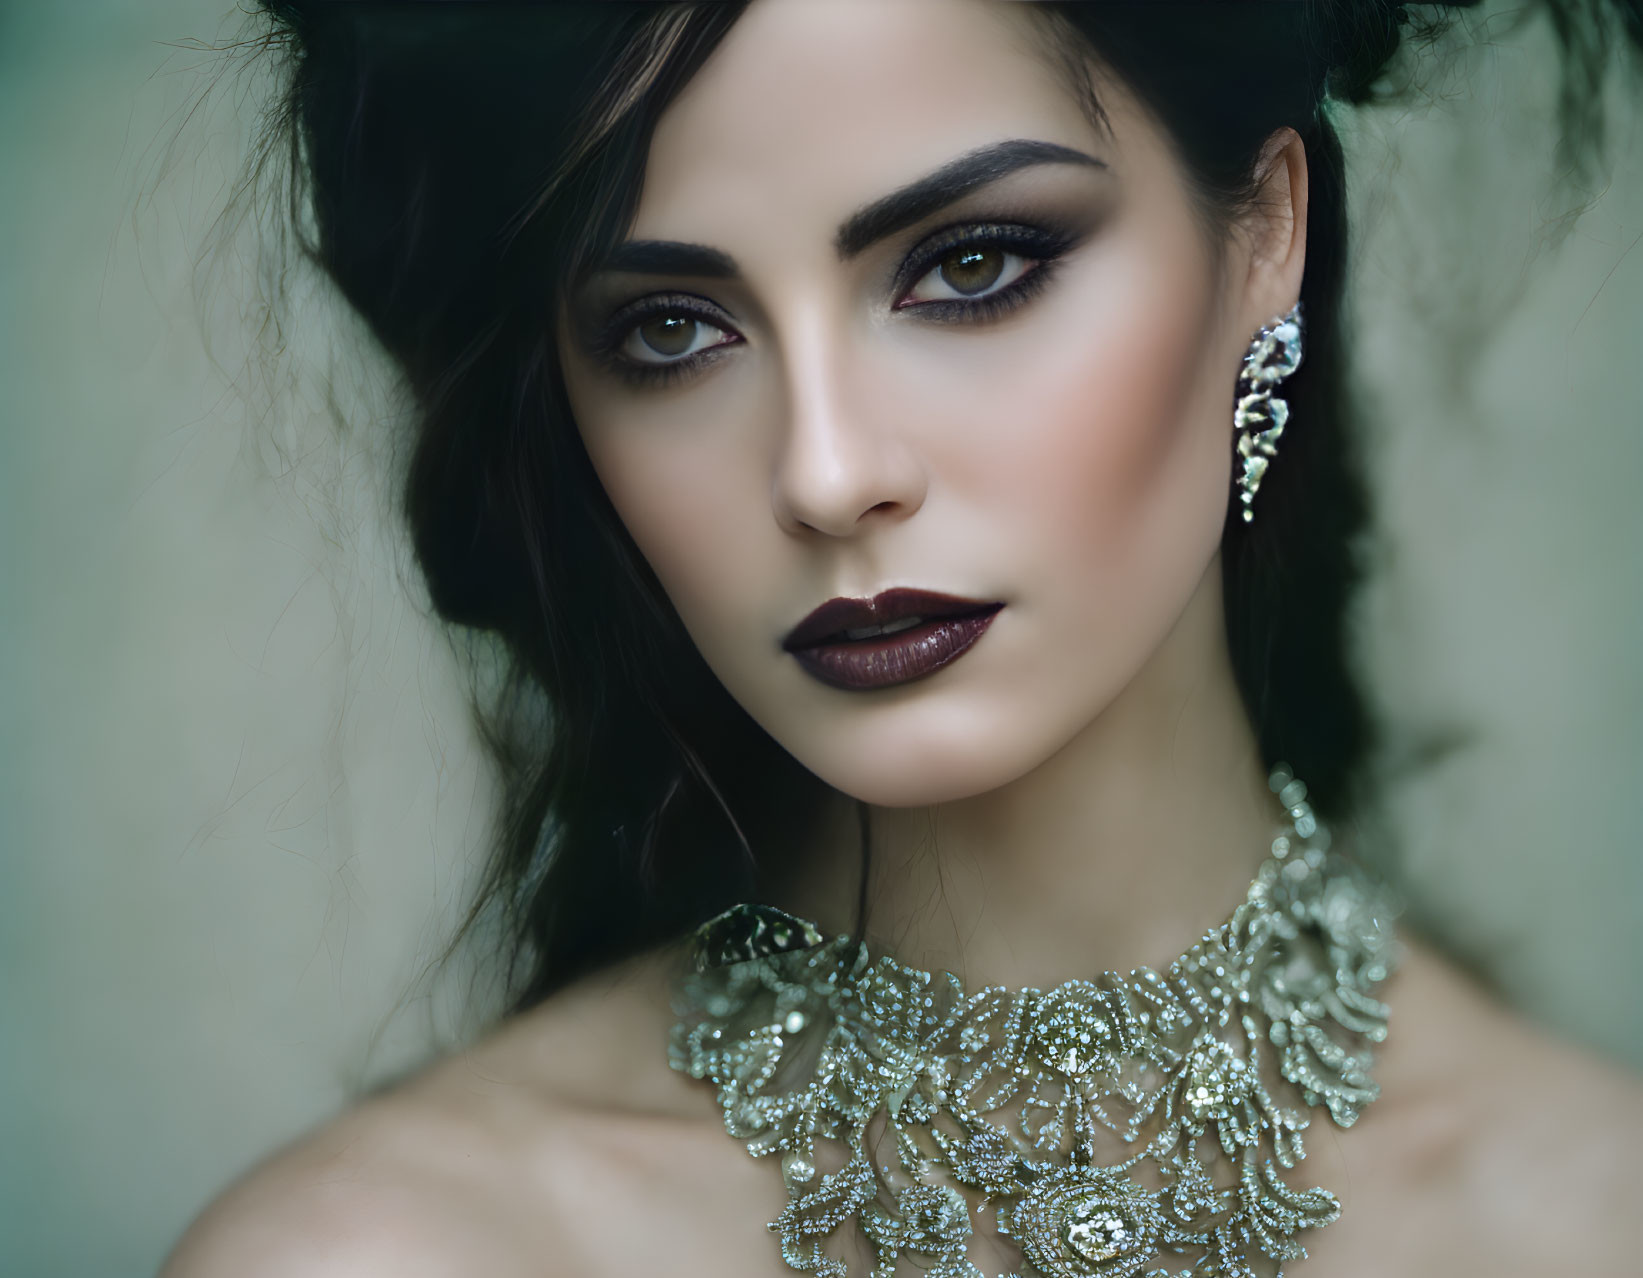 Person with Smoky Eye Makeup, Dark Lipstick, and Elaborate Silver Jewelry